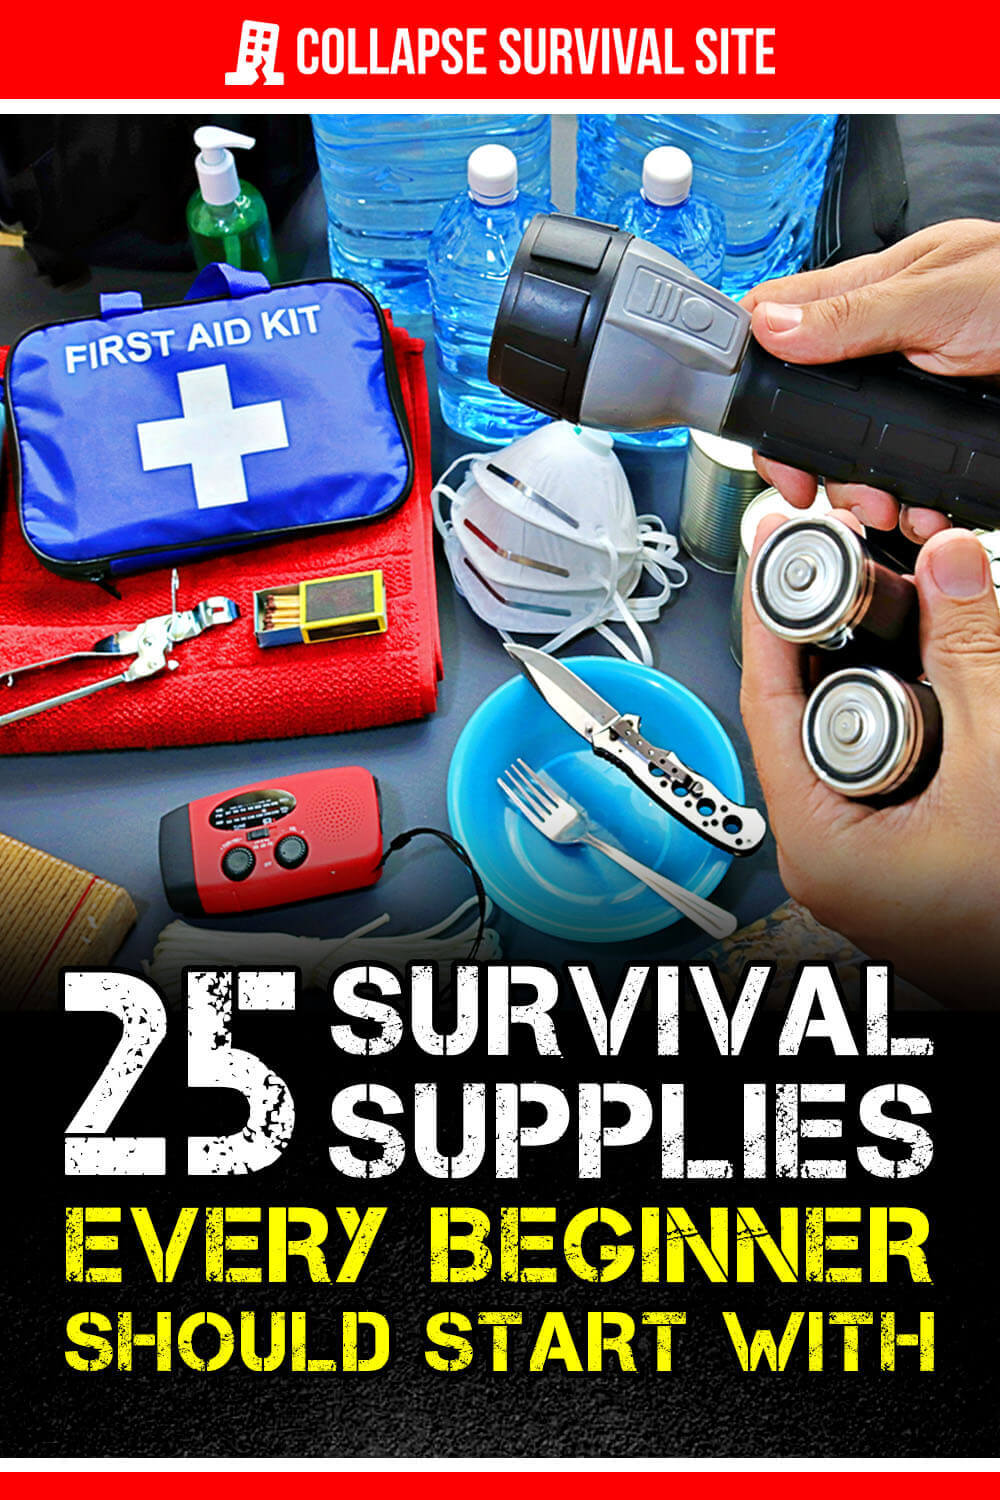 https://collapsesurvivalsite.com/wp-content/uploads/25-survival-supplies-every-beginner-should-start-with-pin-1.jpg?ezimgfmt=rs:0x0/rscb1/ngcb1/notWebP